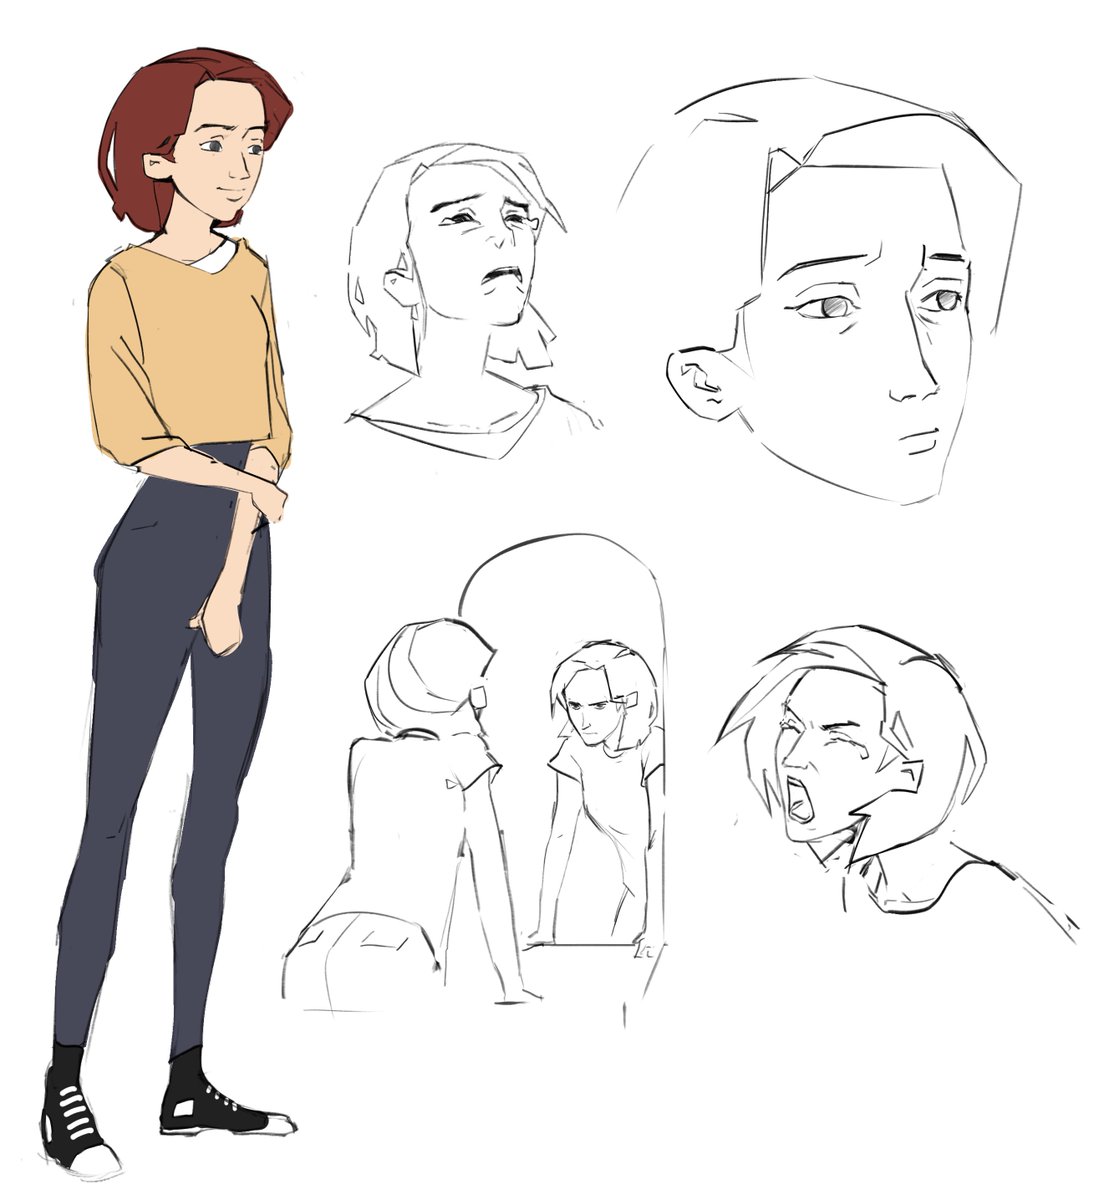 scrapped protag draft for my animated short film 👁️👁️